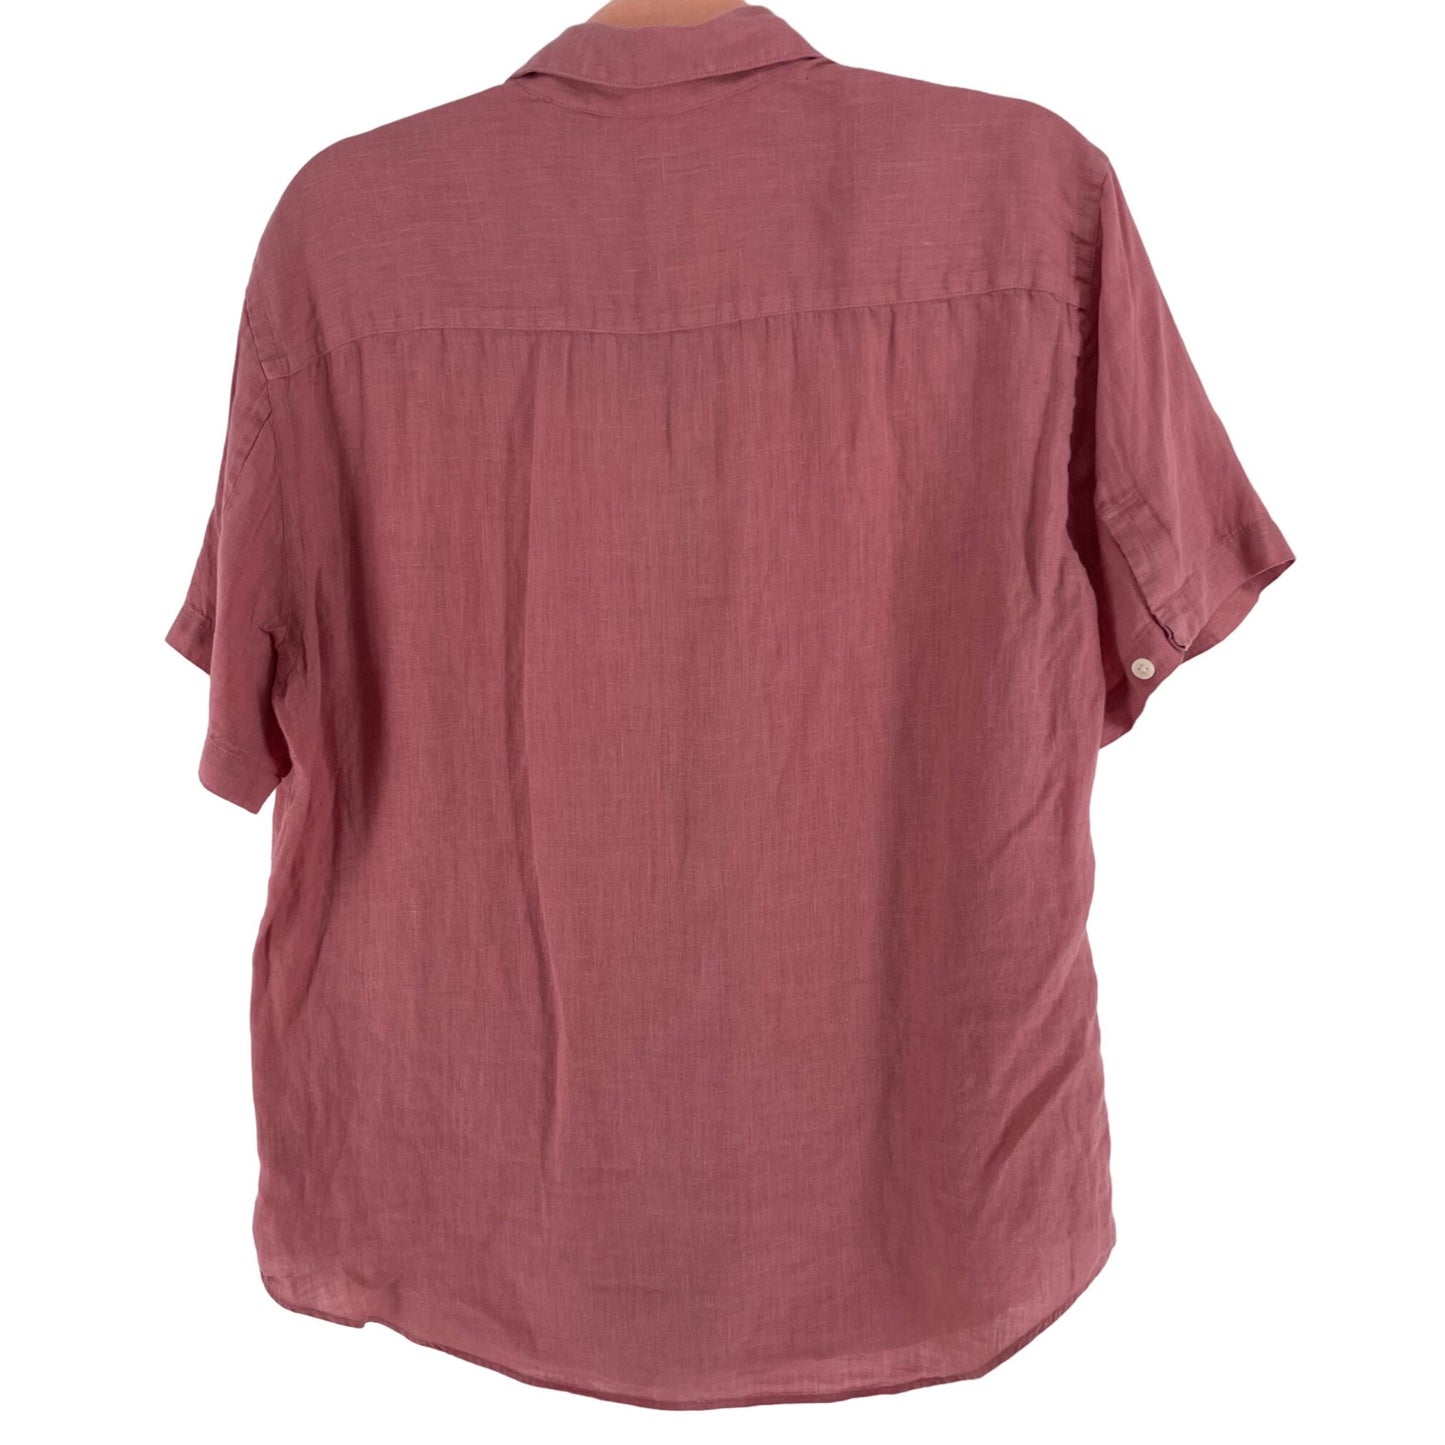 Theory Women's Size Large Pink Linen Collared Short-Sleeved Button-Down Top